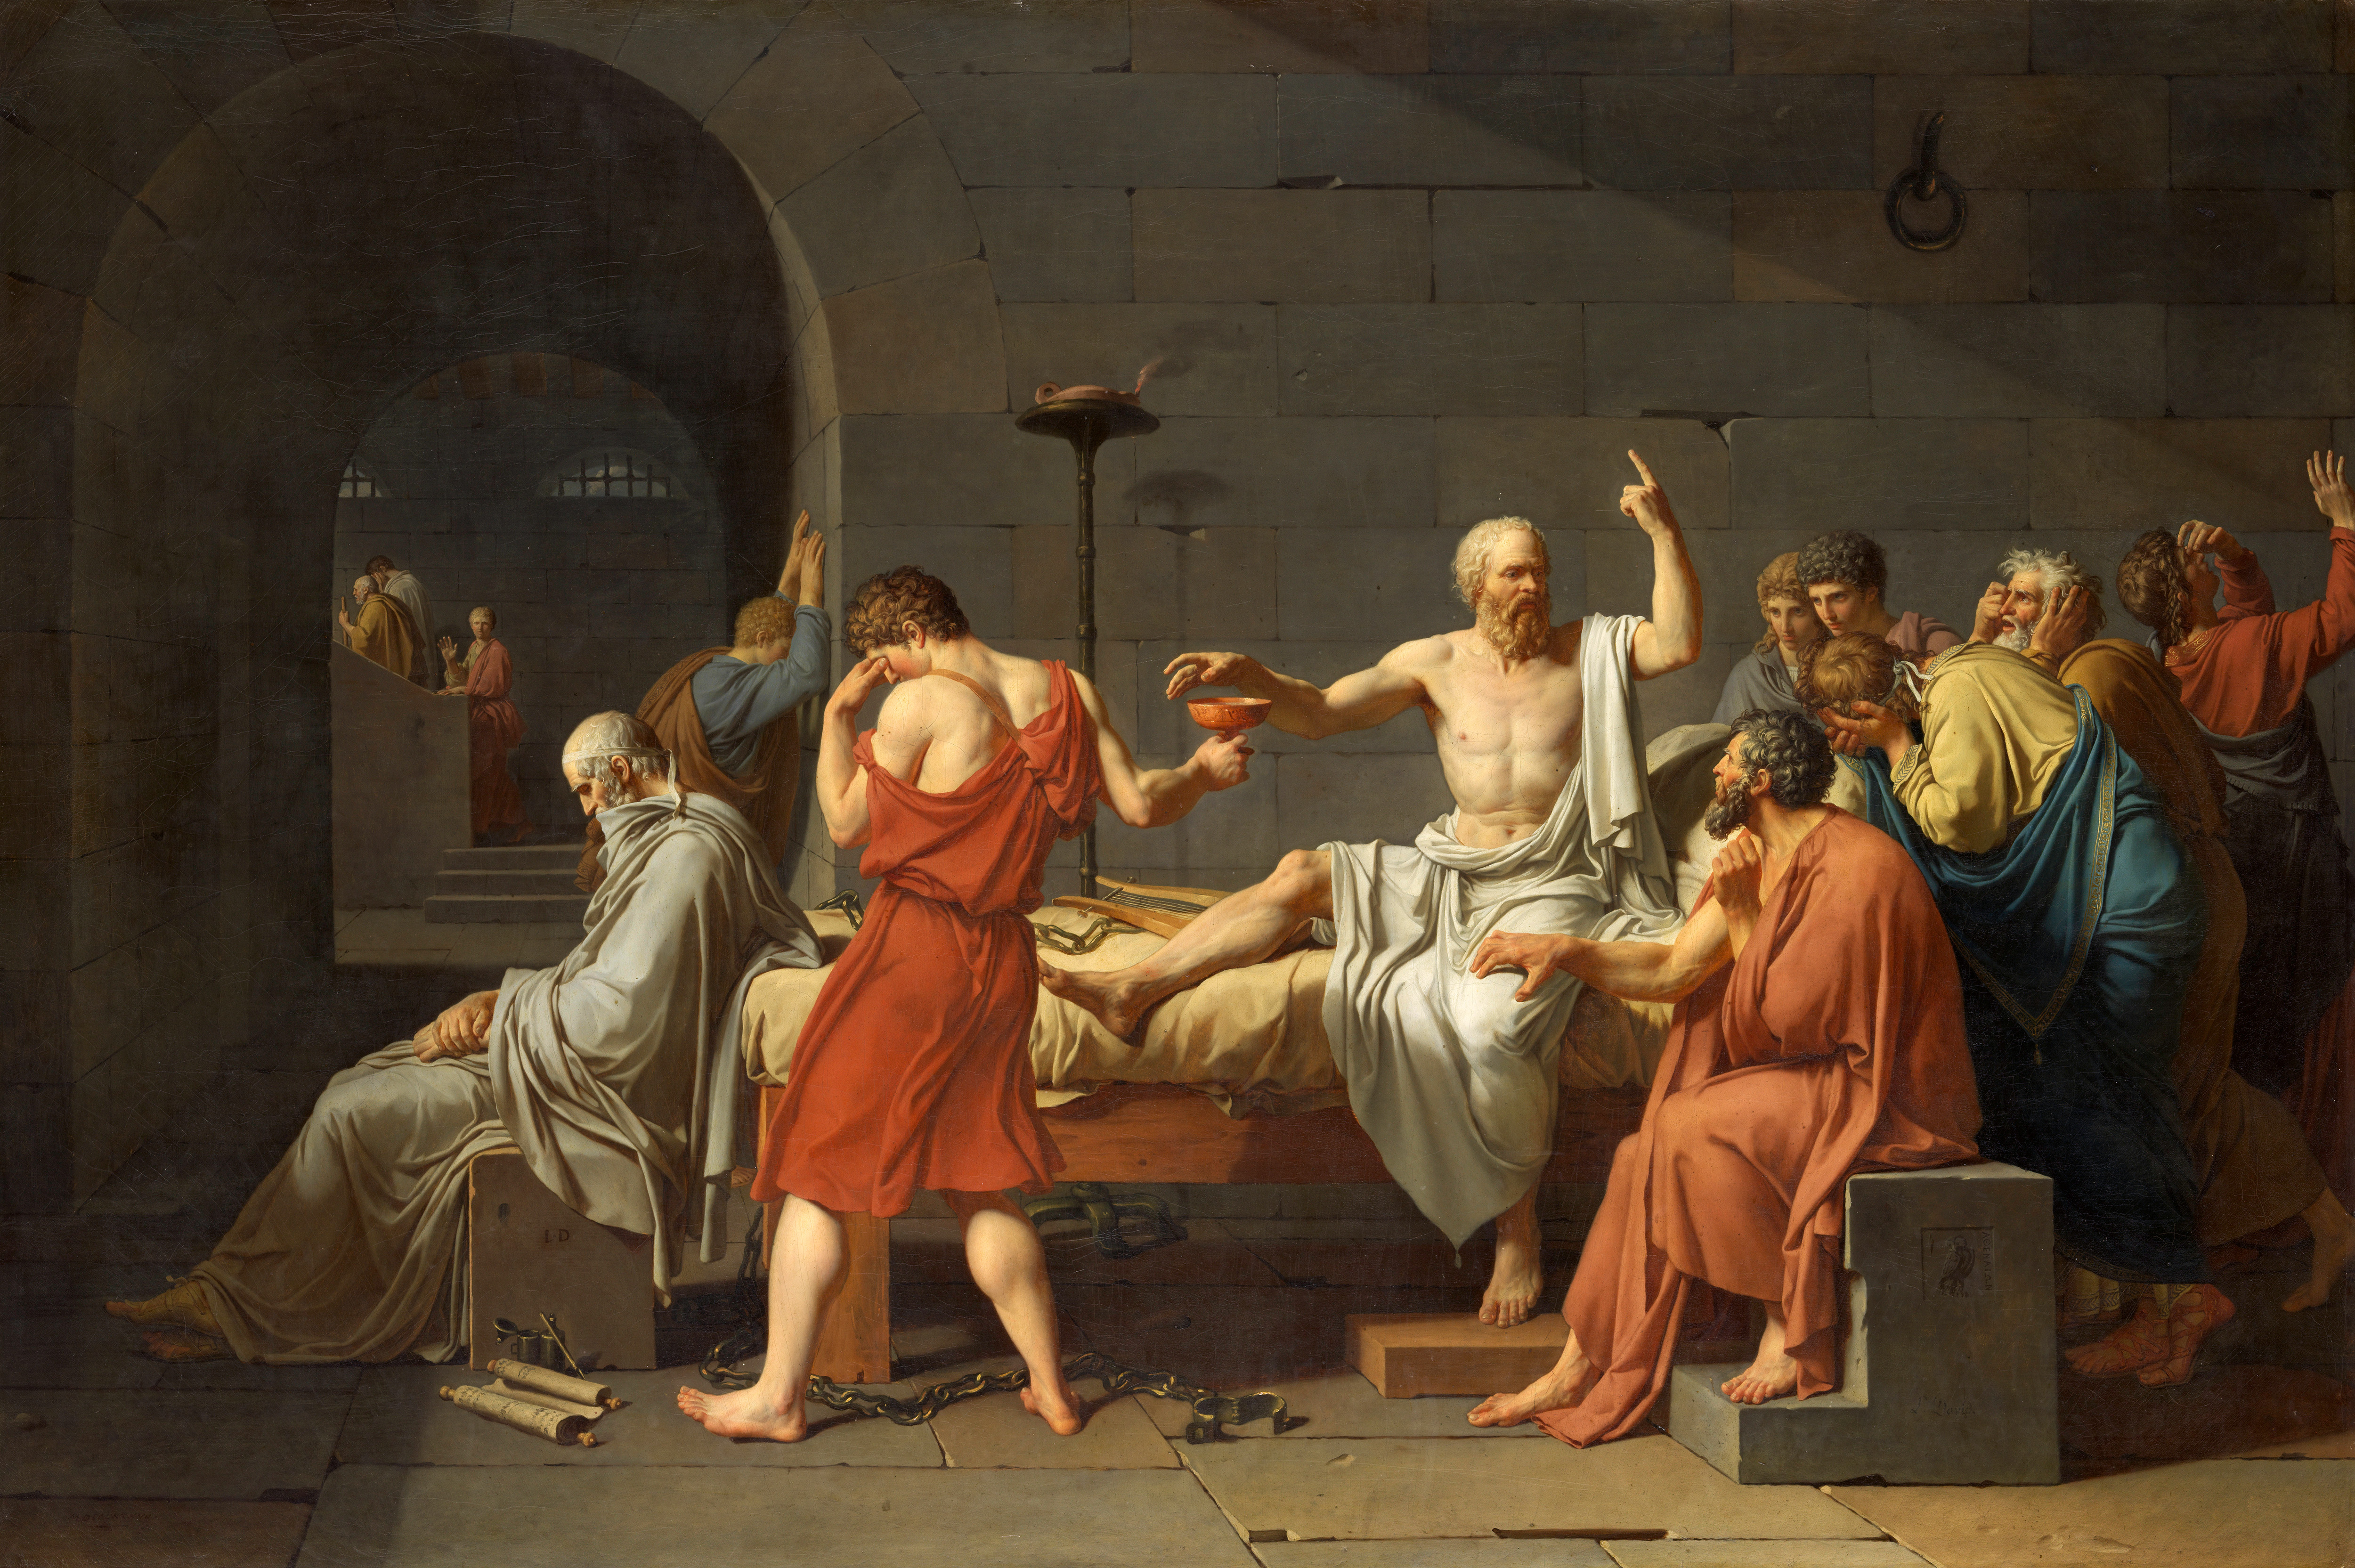 A painting of the philosopher Socrates speaking before a crowd